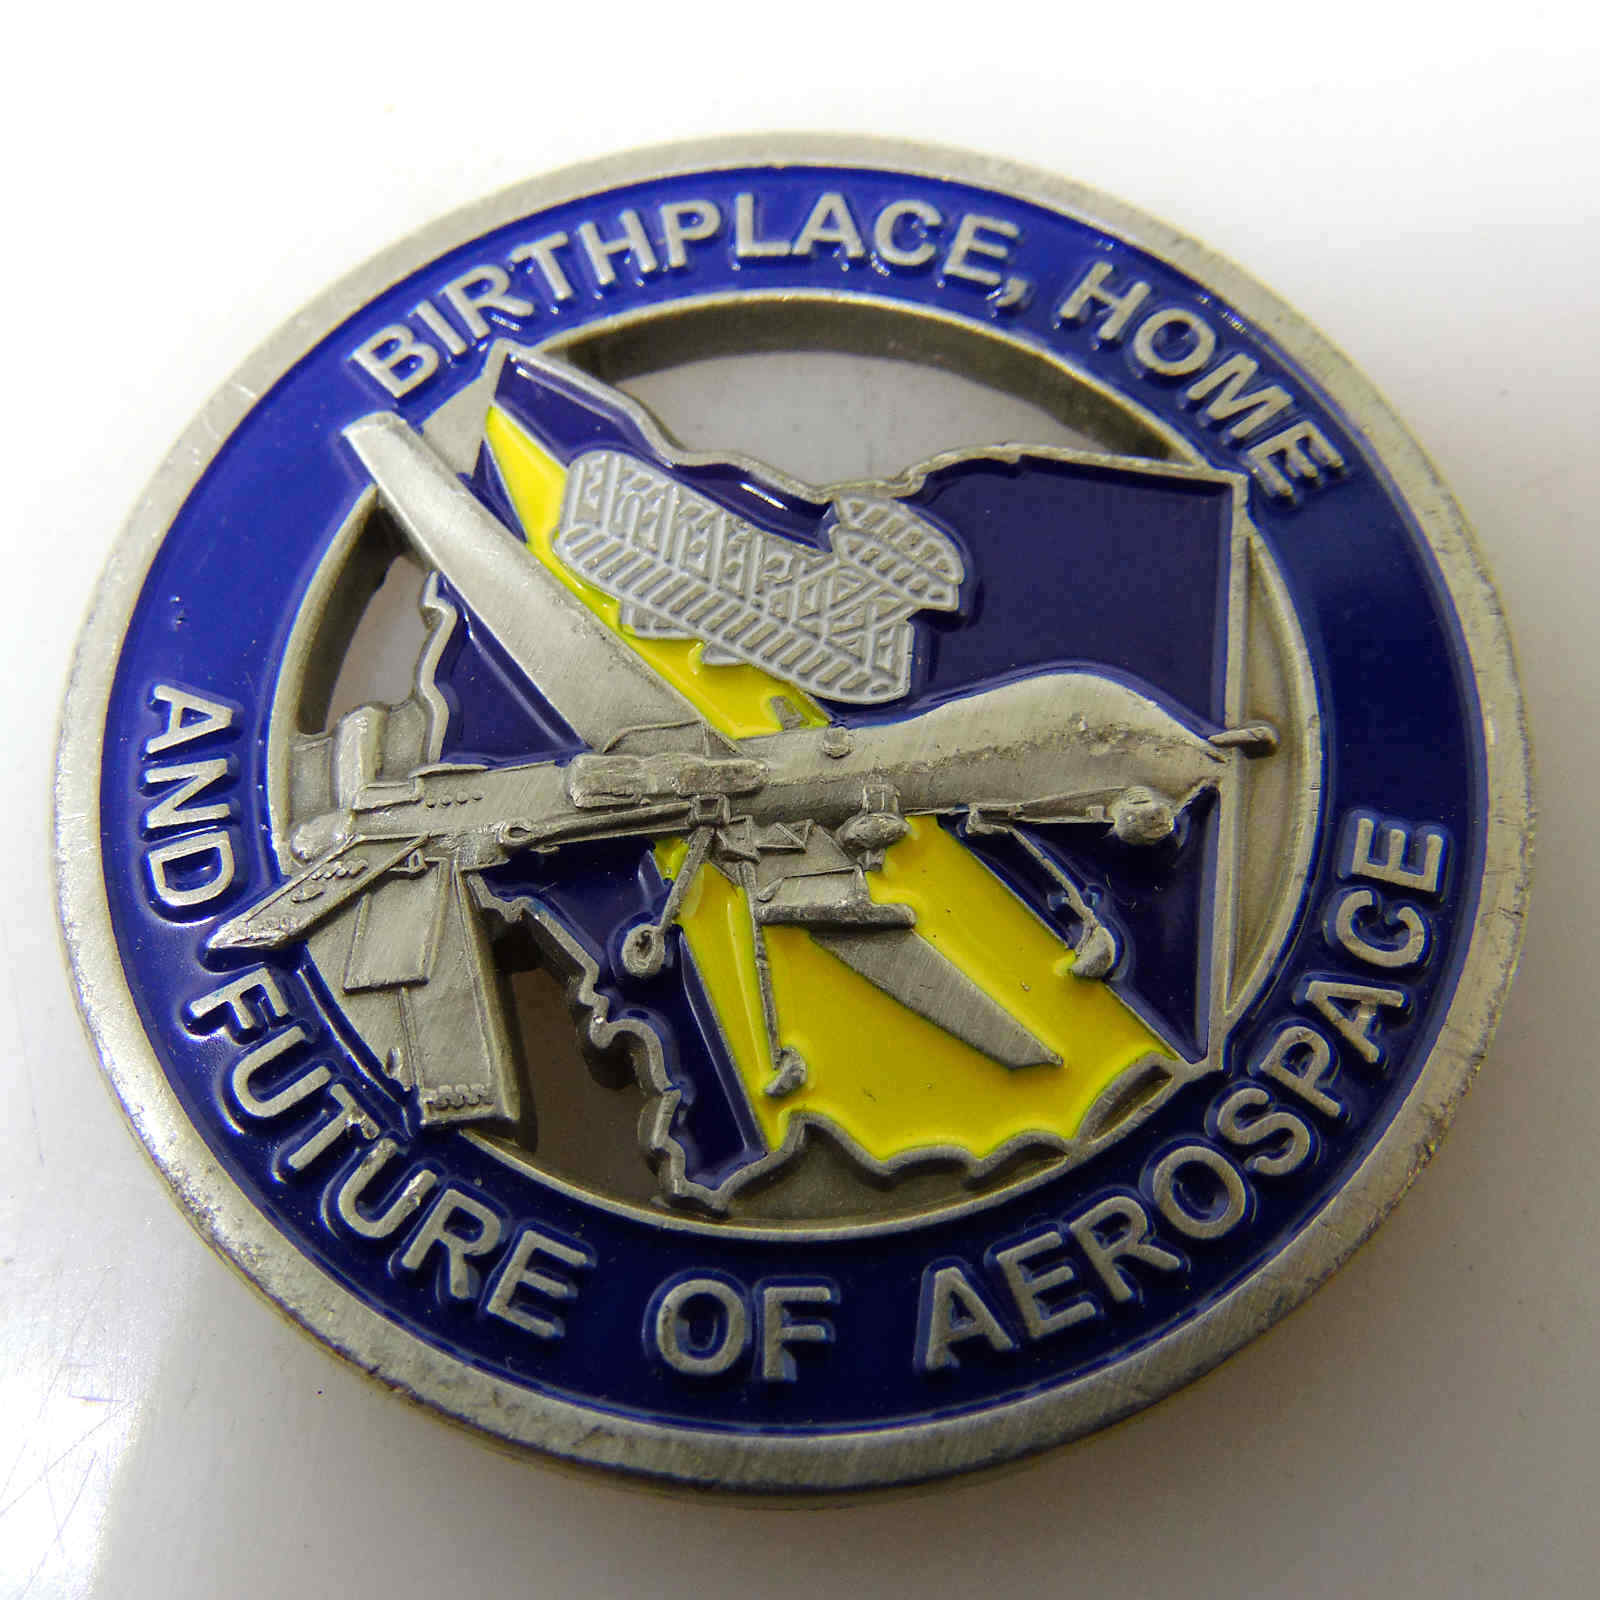 WRIGHT PATTERSON AIR FORCE BASE CHALLENGE COIN